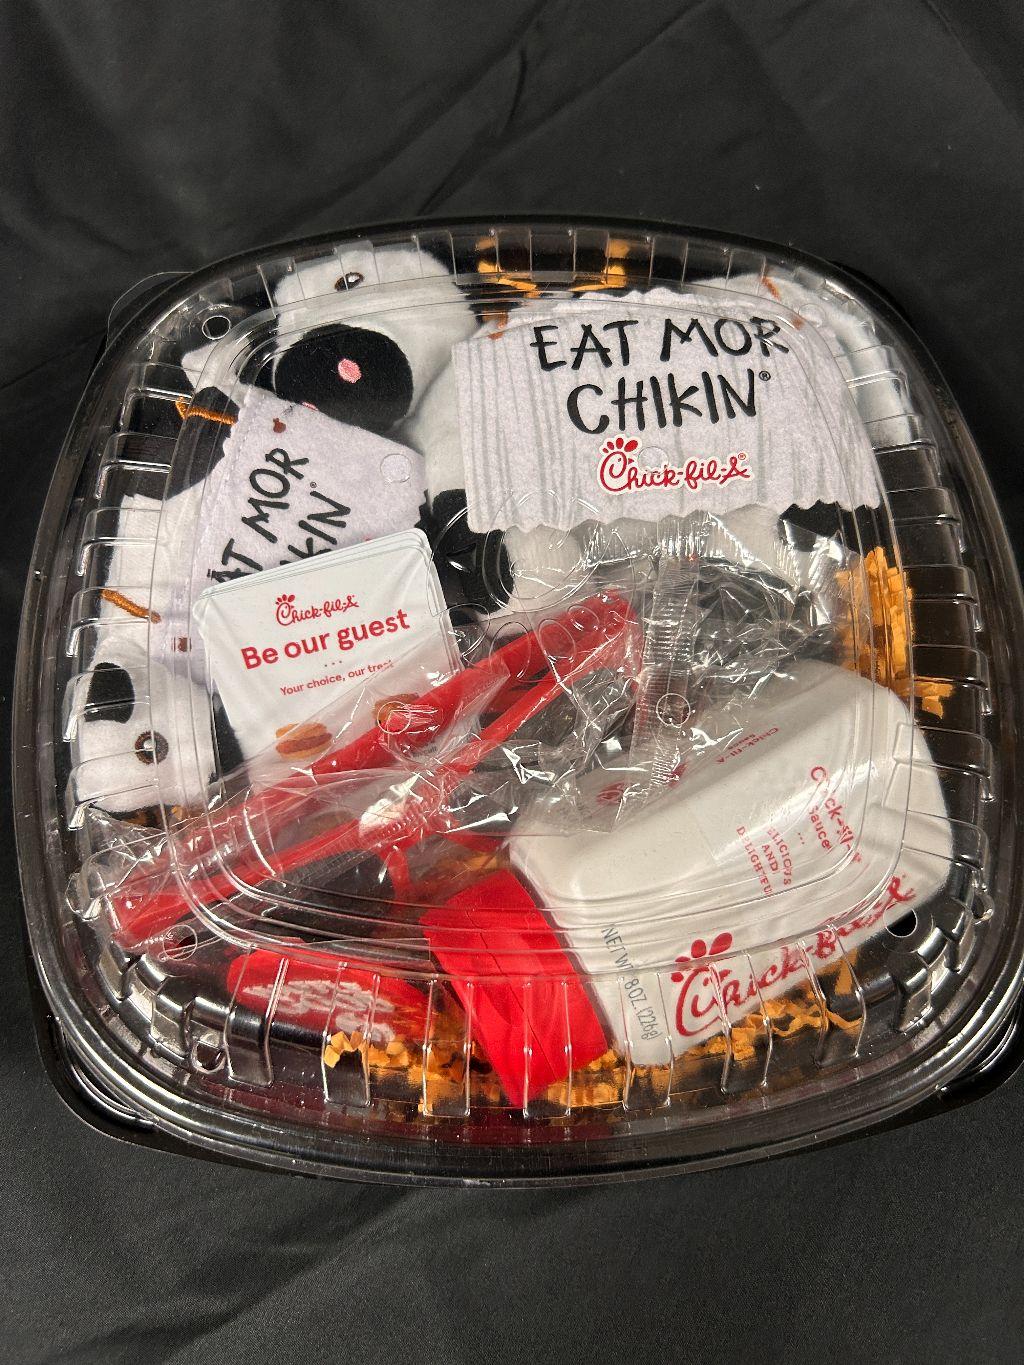 Chick Fil A Basket with five free entrees